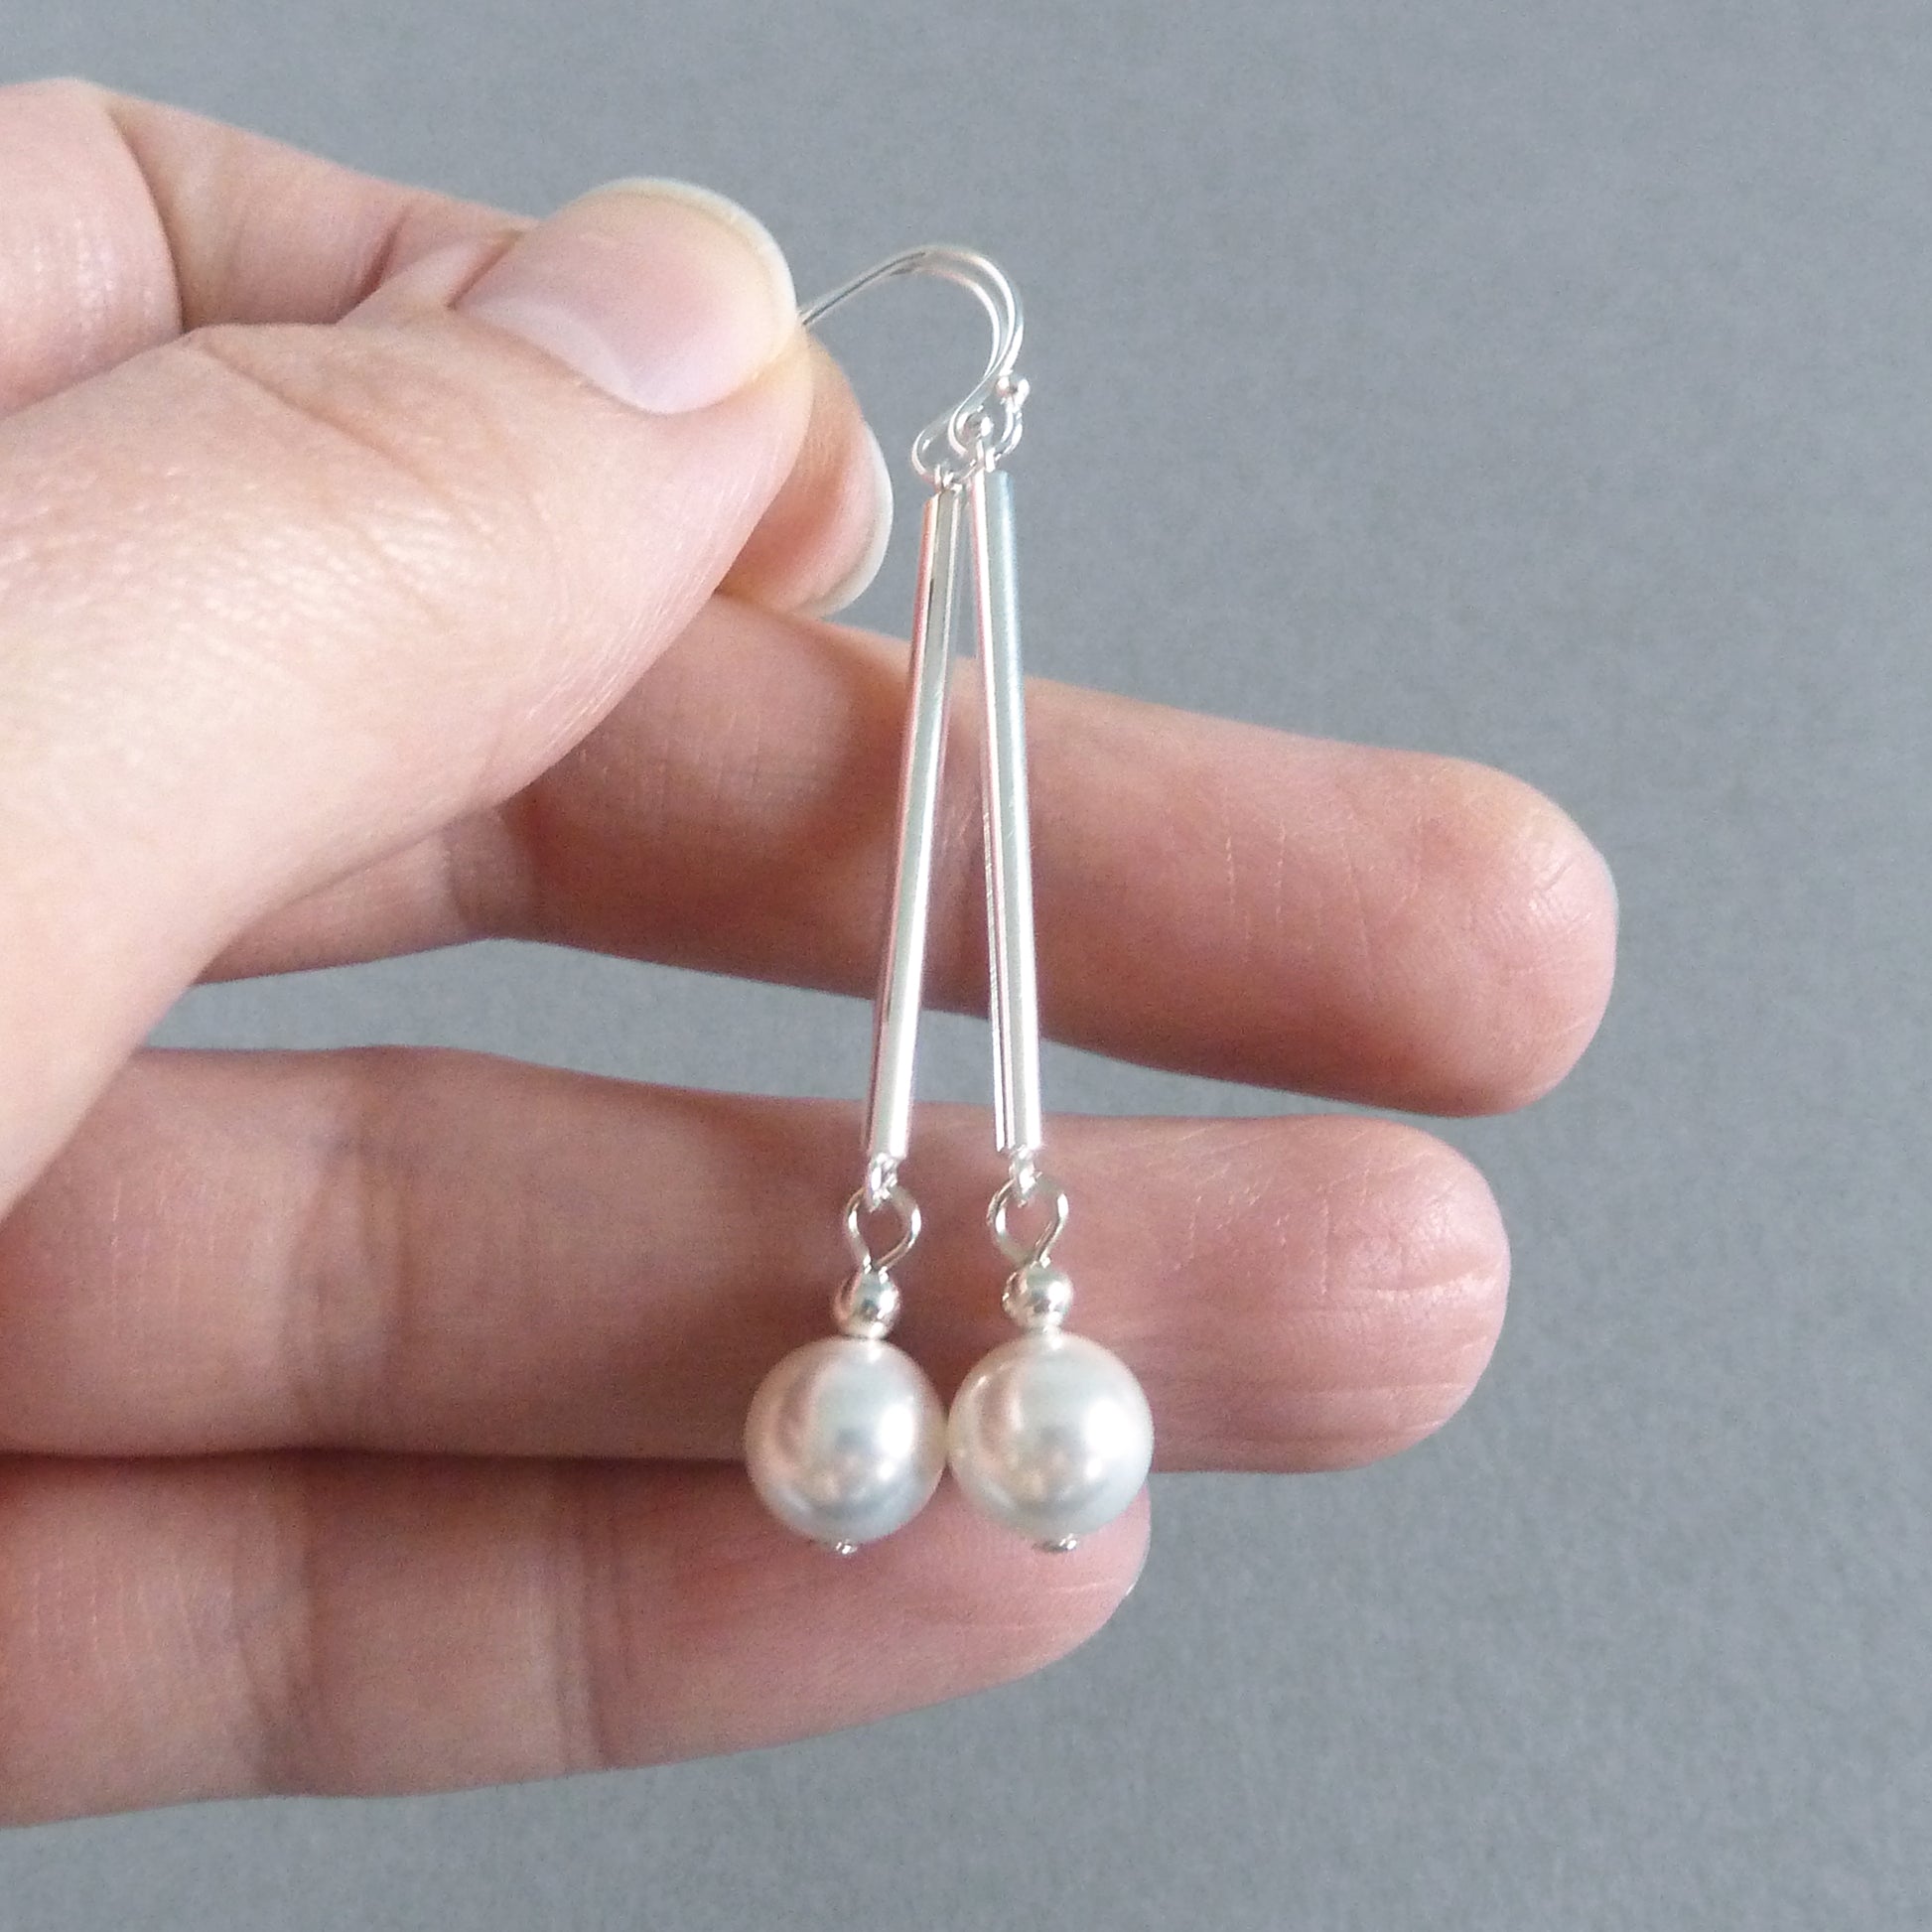 Silver and white pearl dangle earrings